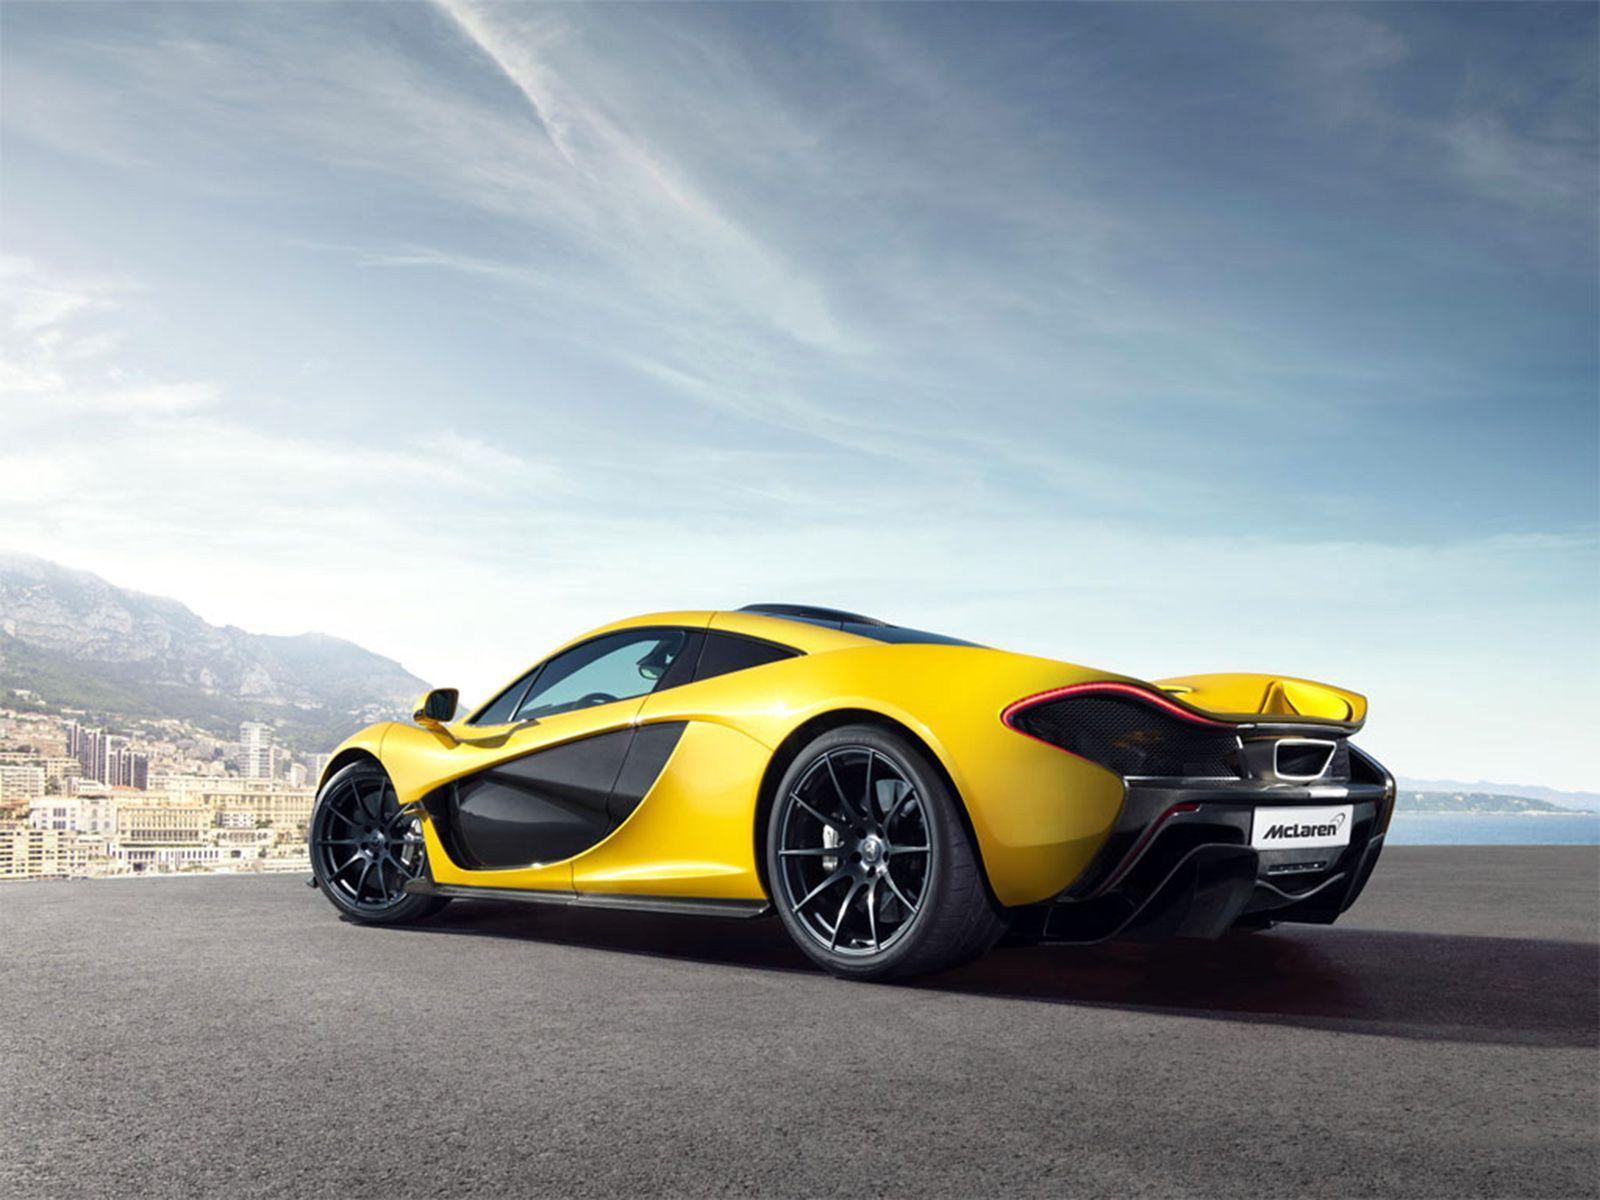 Wallpaper New Mclaren Cars HD High Resolution All On Image Their